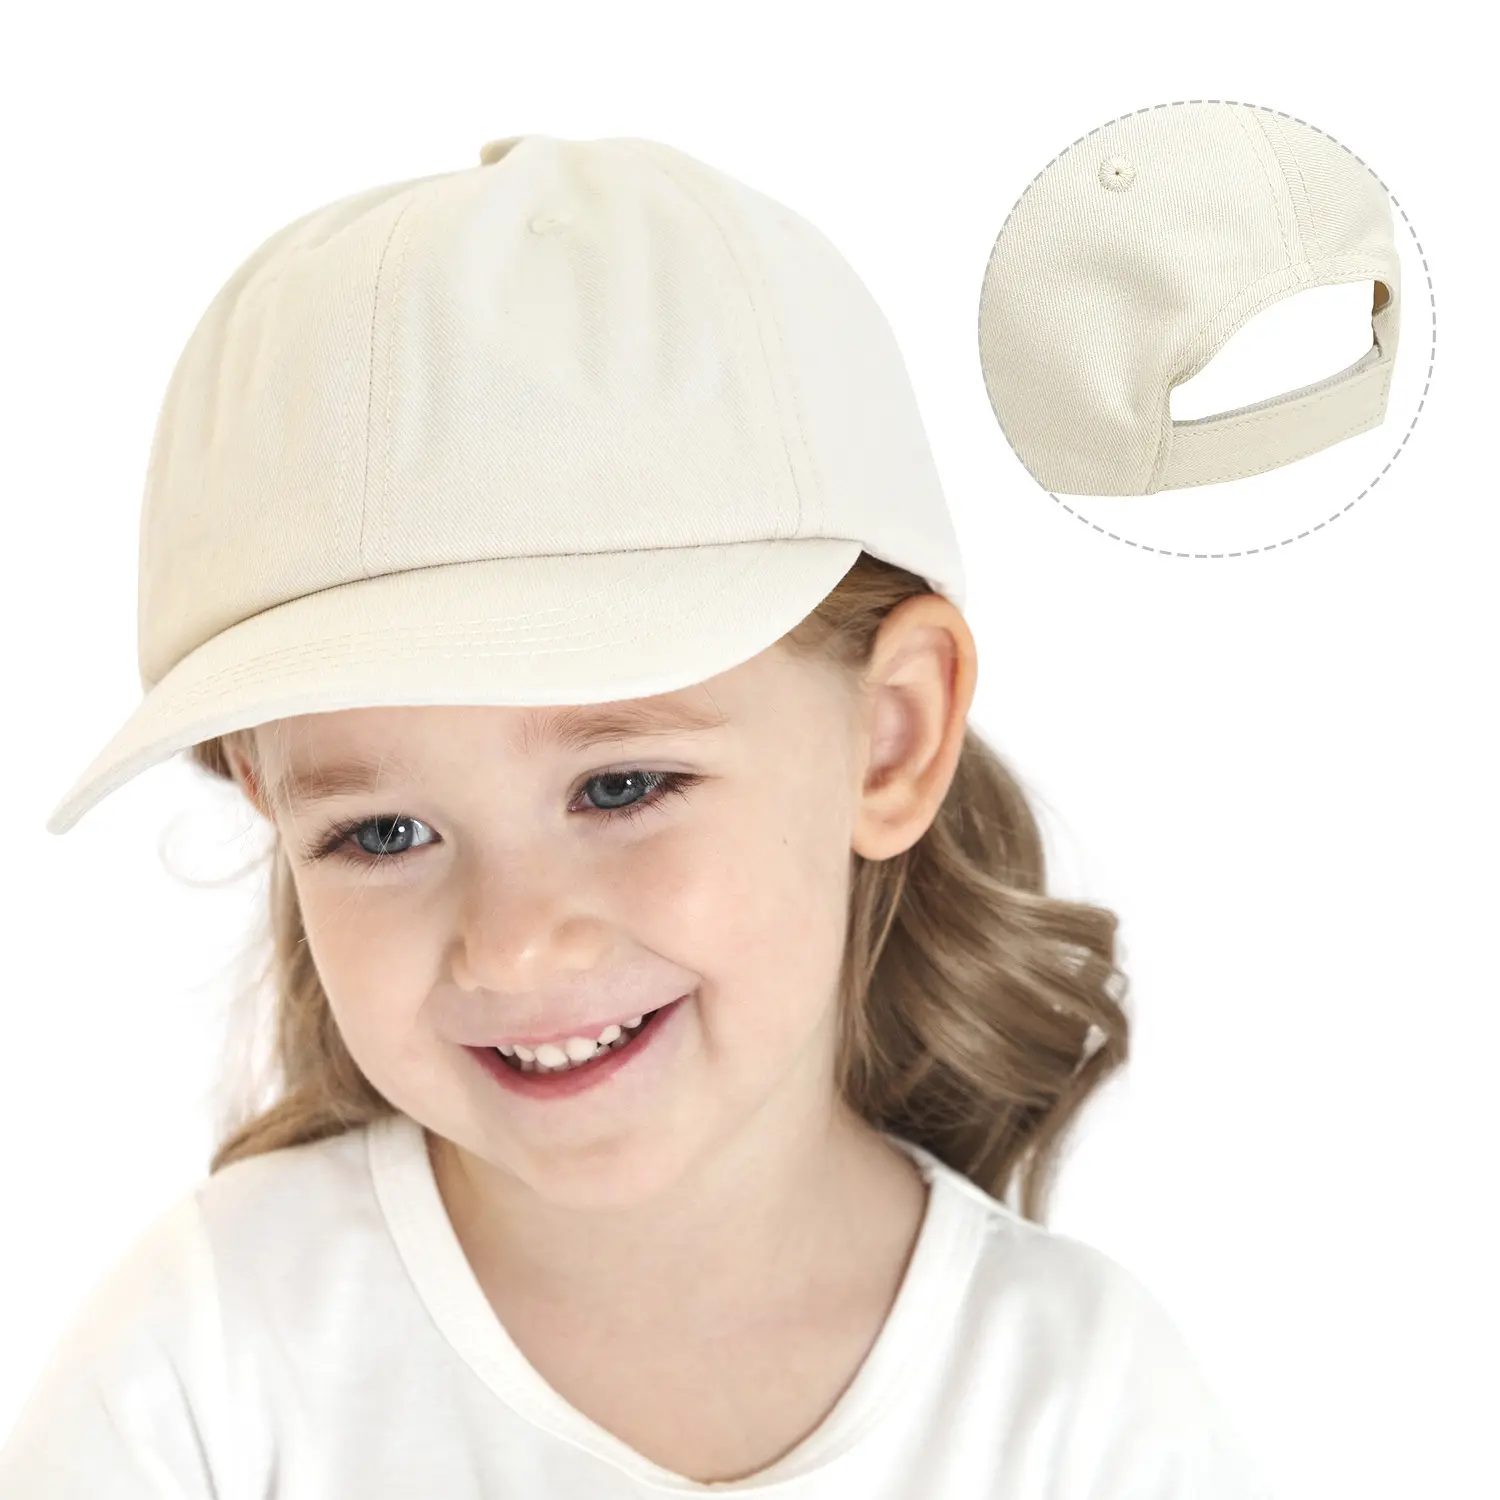 high quality 2-5 years old cheap 6 panel cute solid color custom kid baseball cap hat